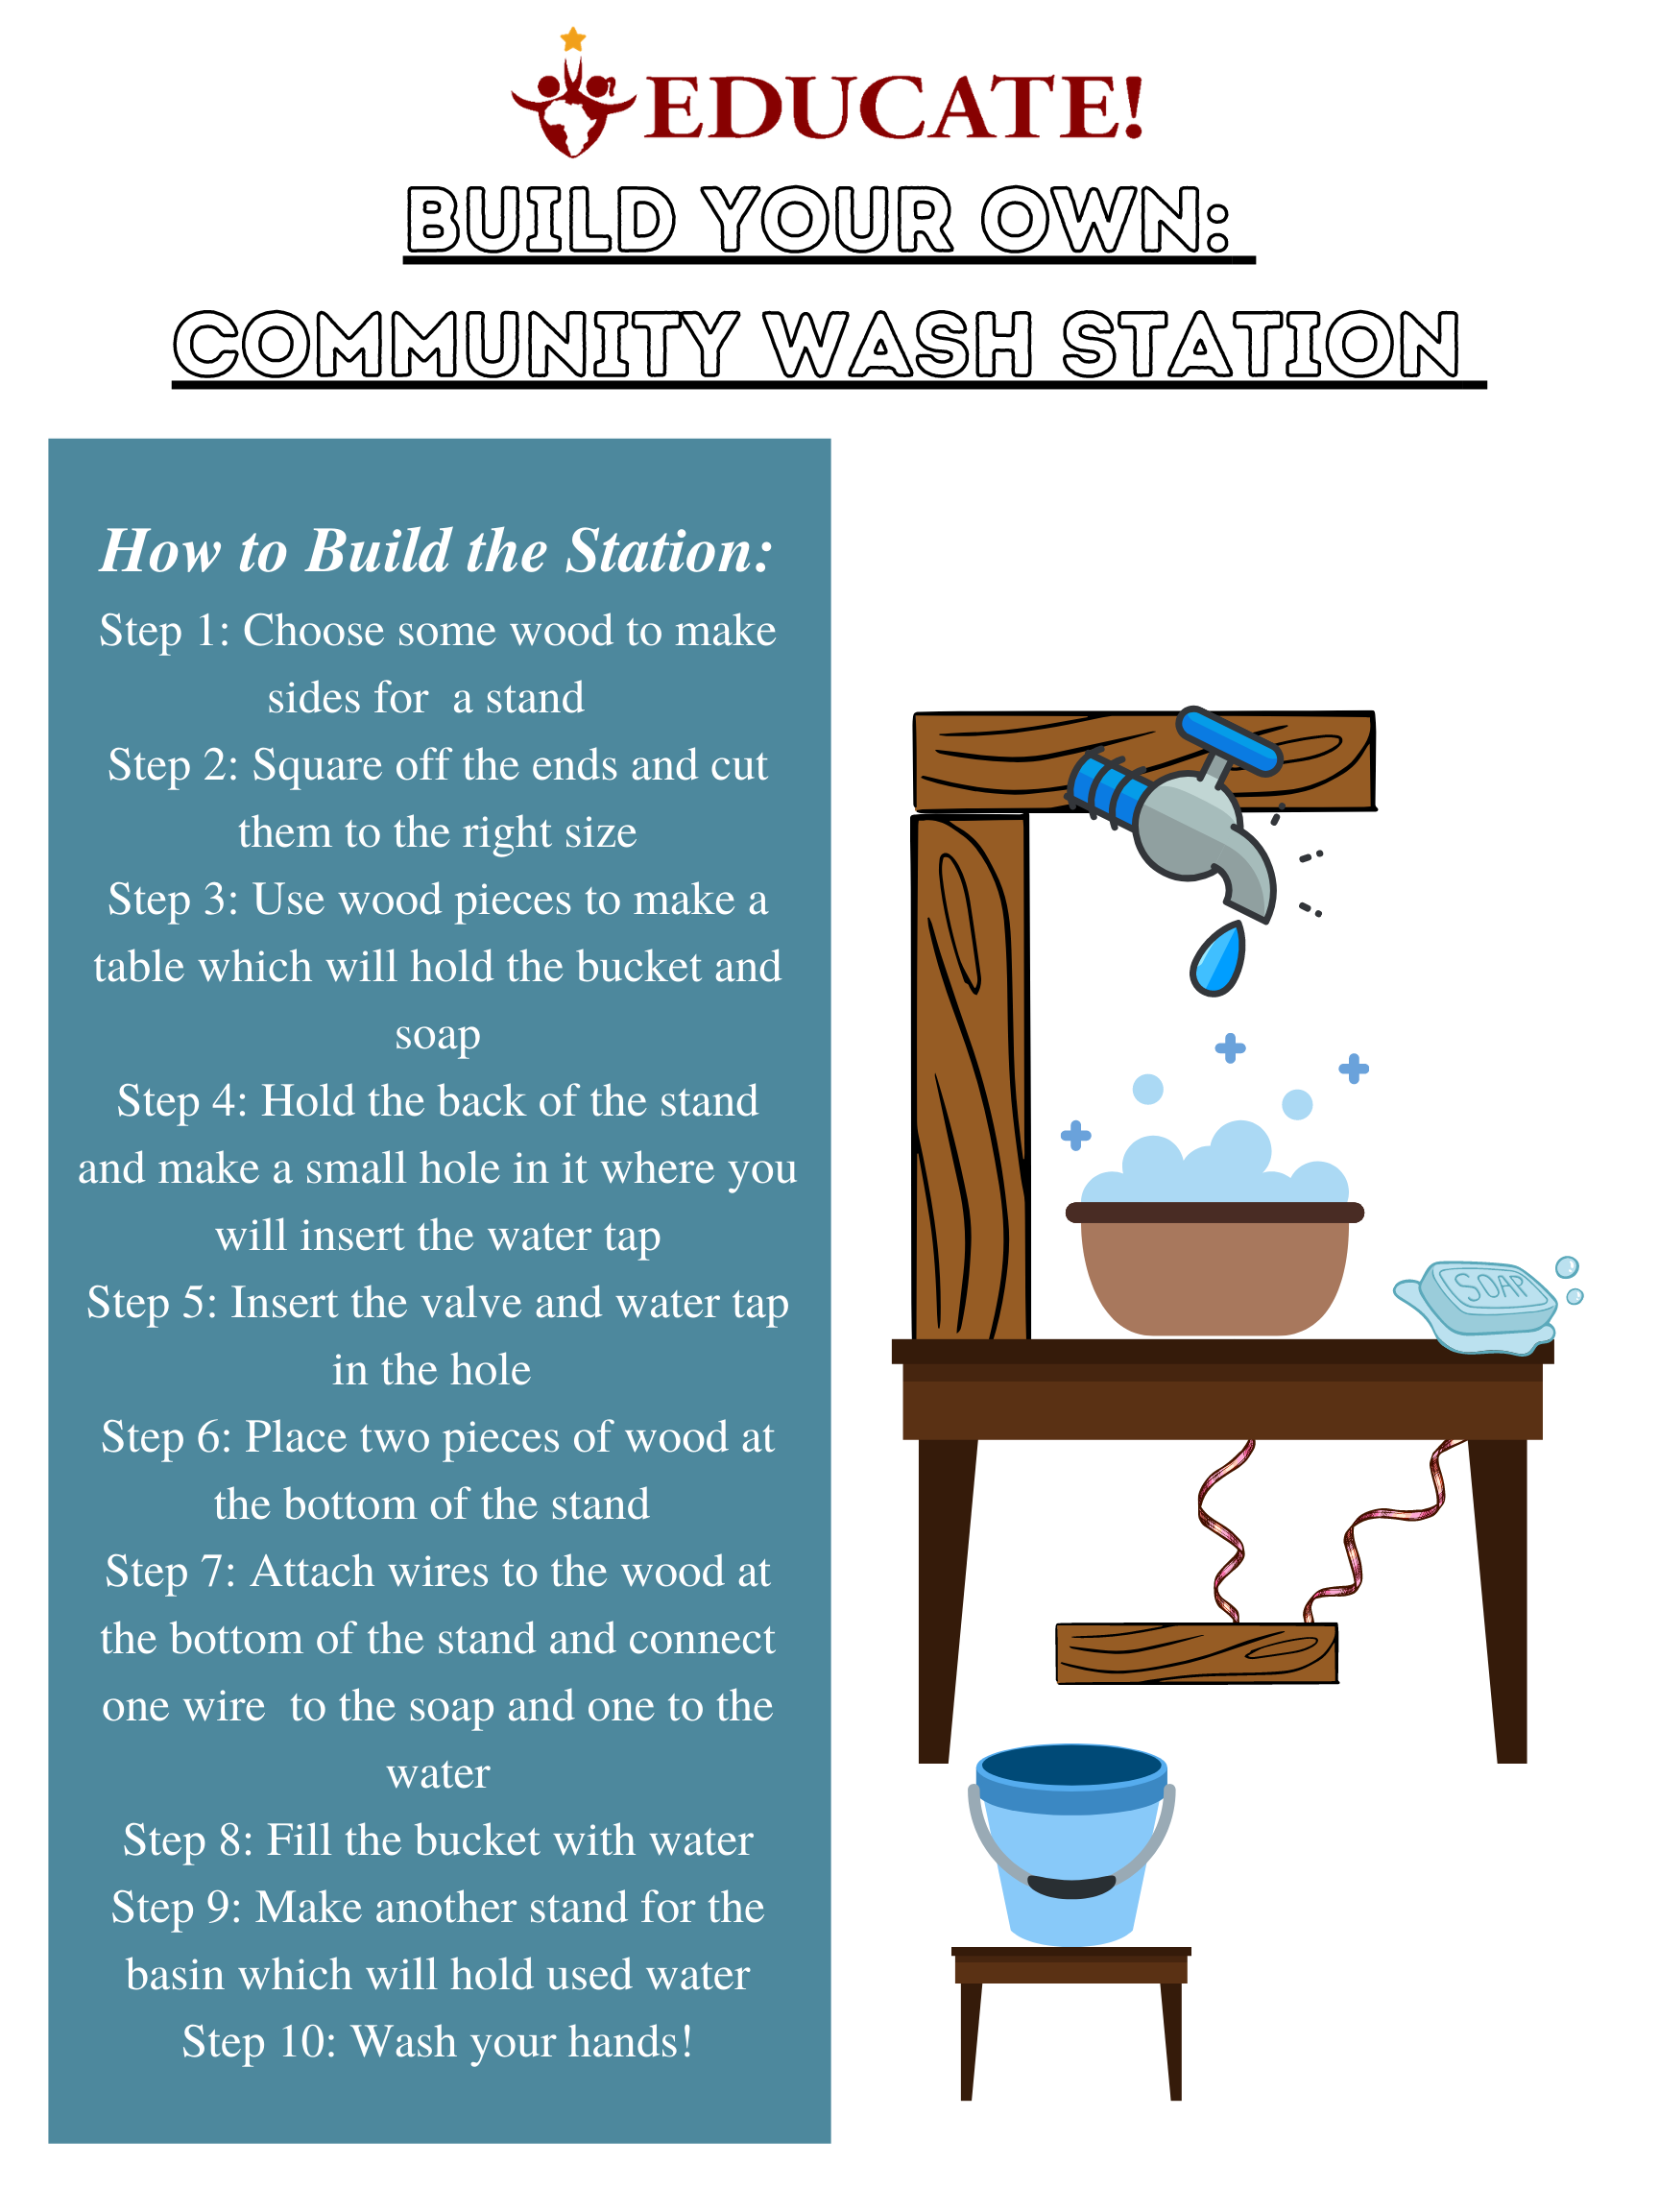 build your own_ Wash Station (1).png